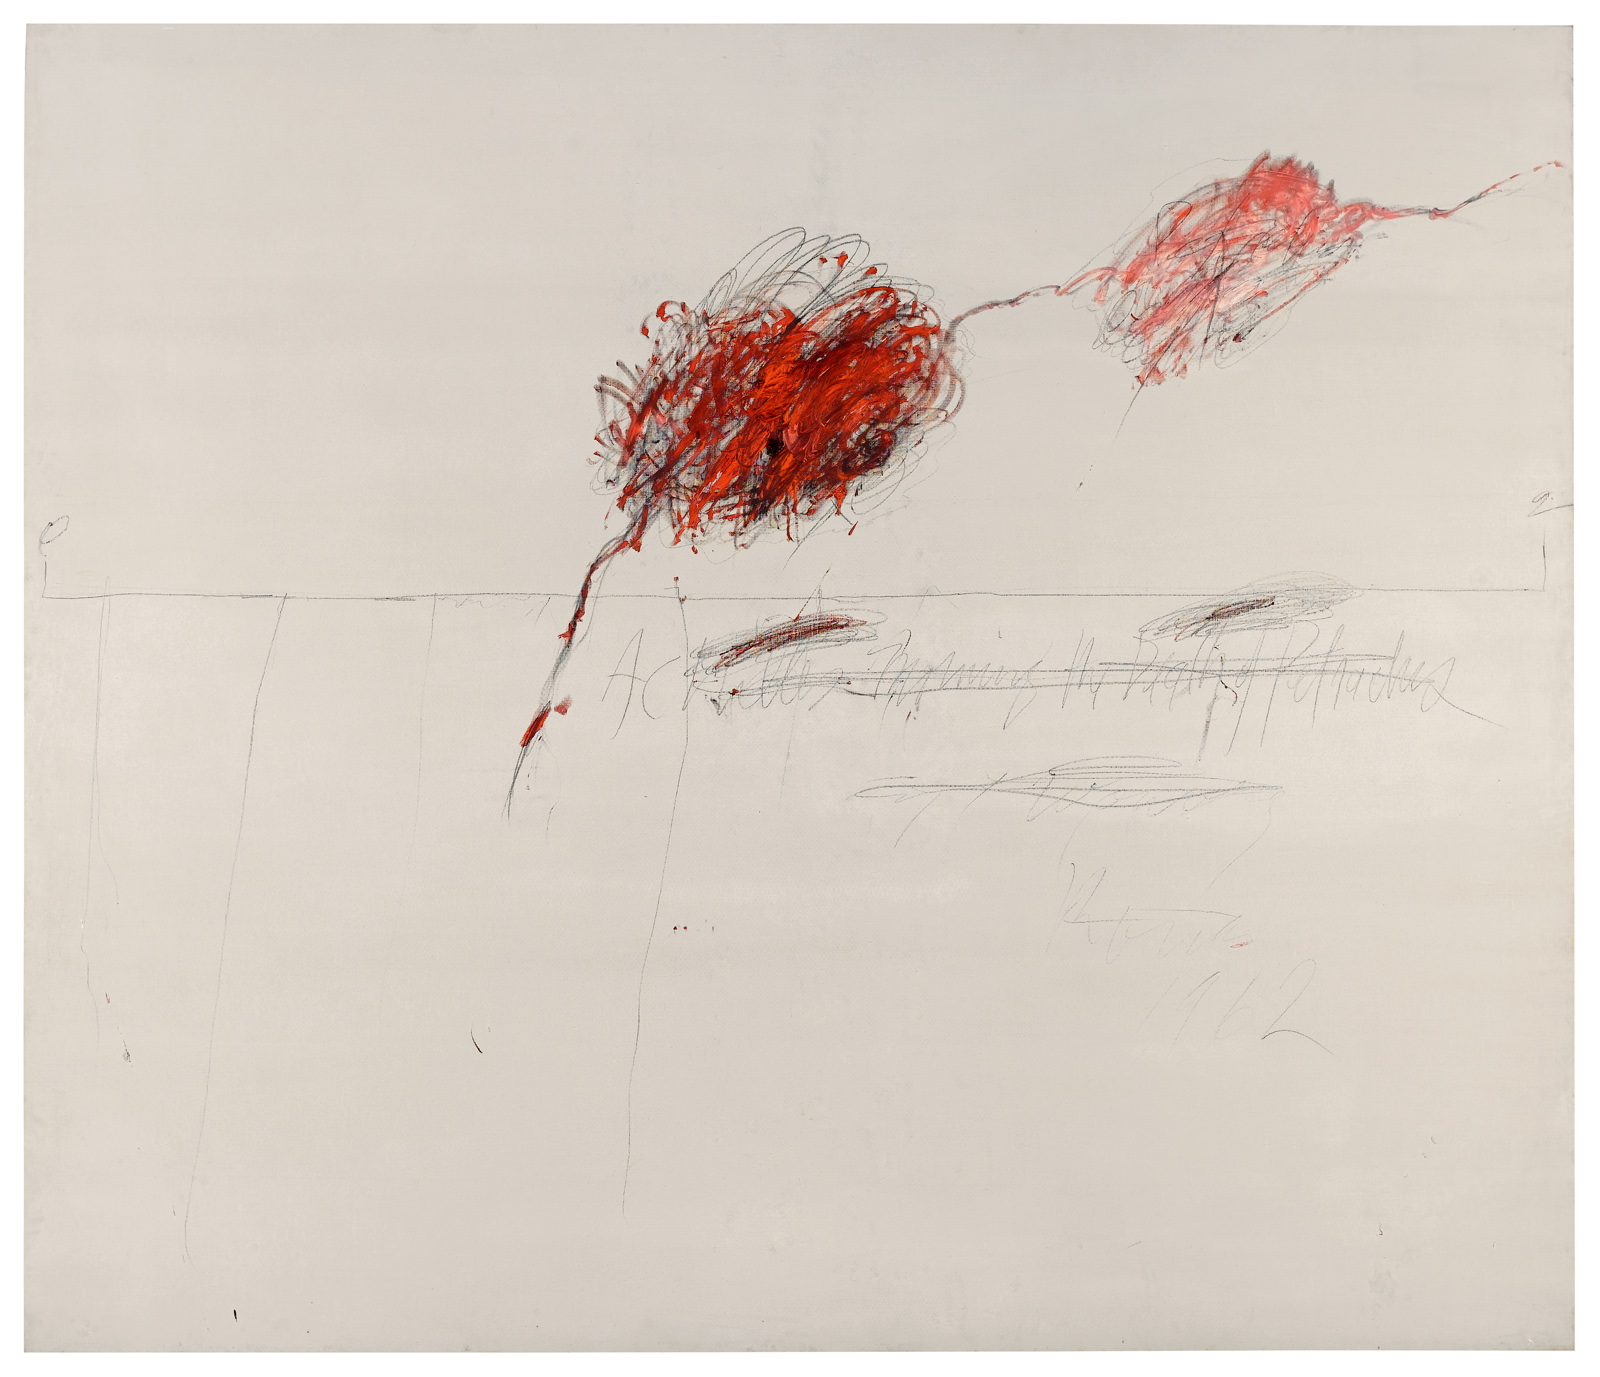 Cy Twombly (American, 1928-2011) 'Achilles Mourning the Death of Patroclus' 1962